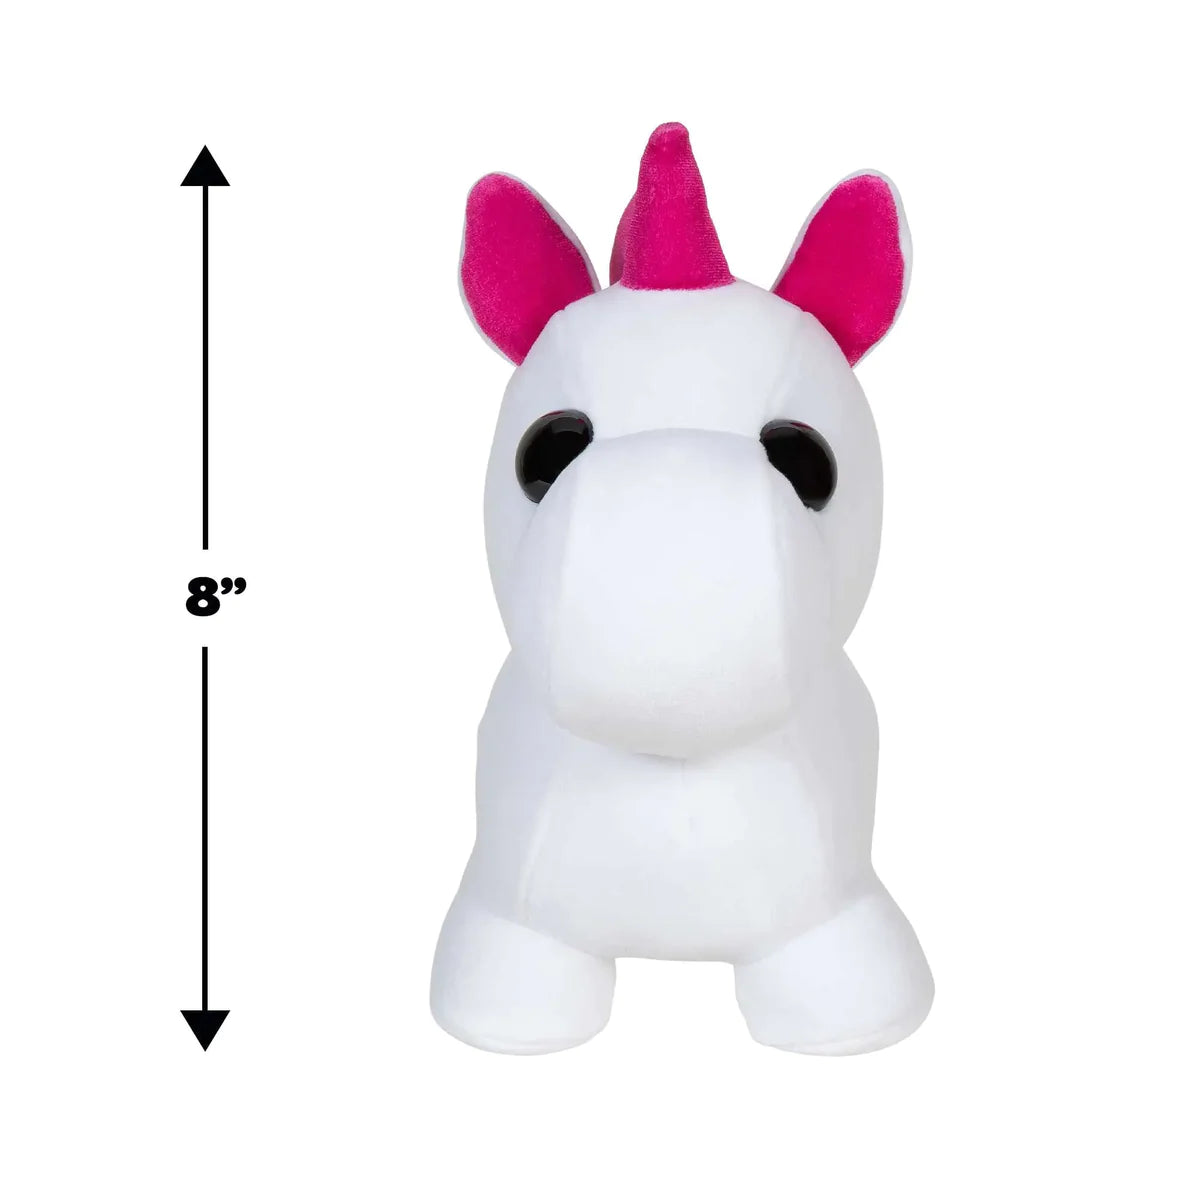 Adopt Me Series 1 Unicorn 8 Inch Collector Plush Soft Toy